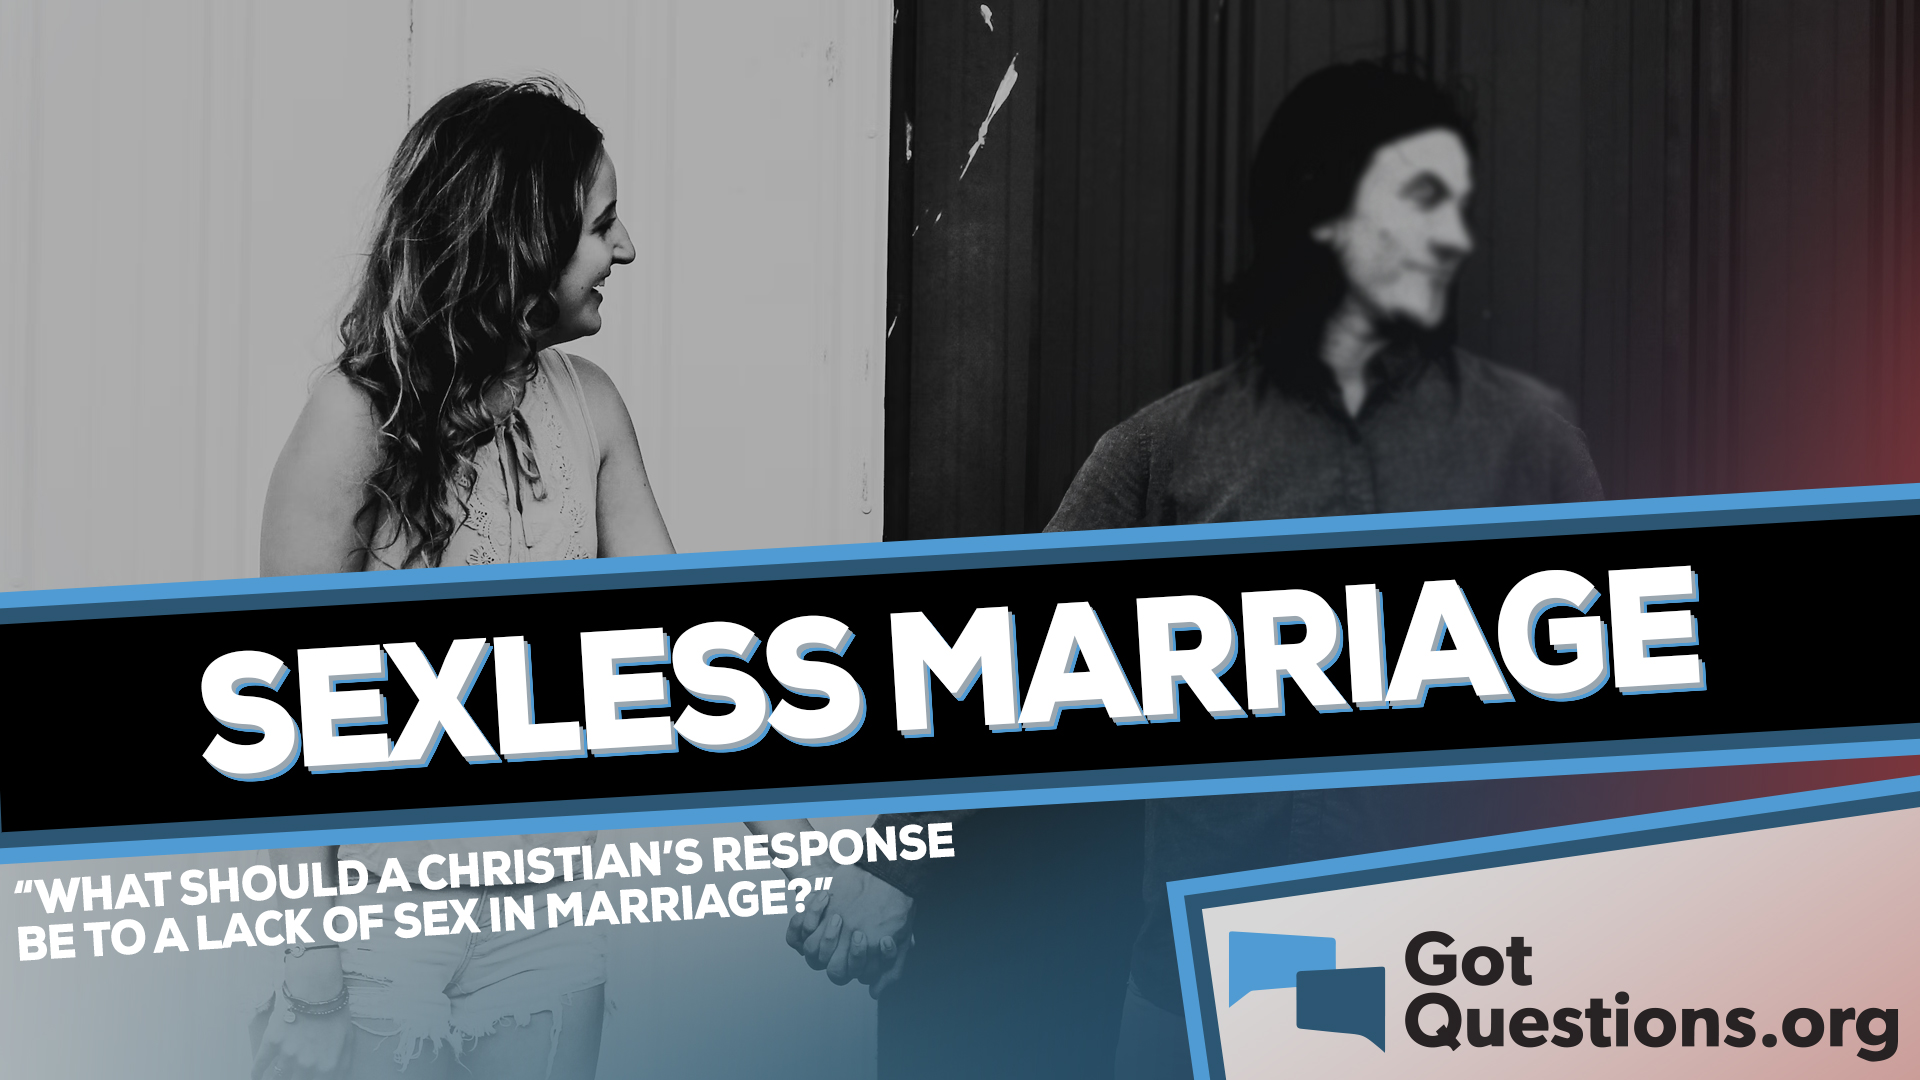 What should be a Christians response to a lack of sex in marriage (a sexless marriage)? GotQuestions pic image